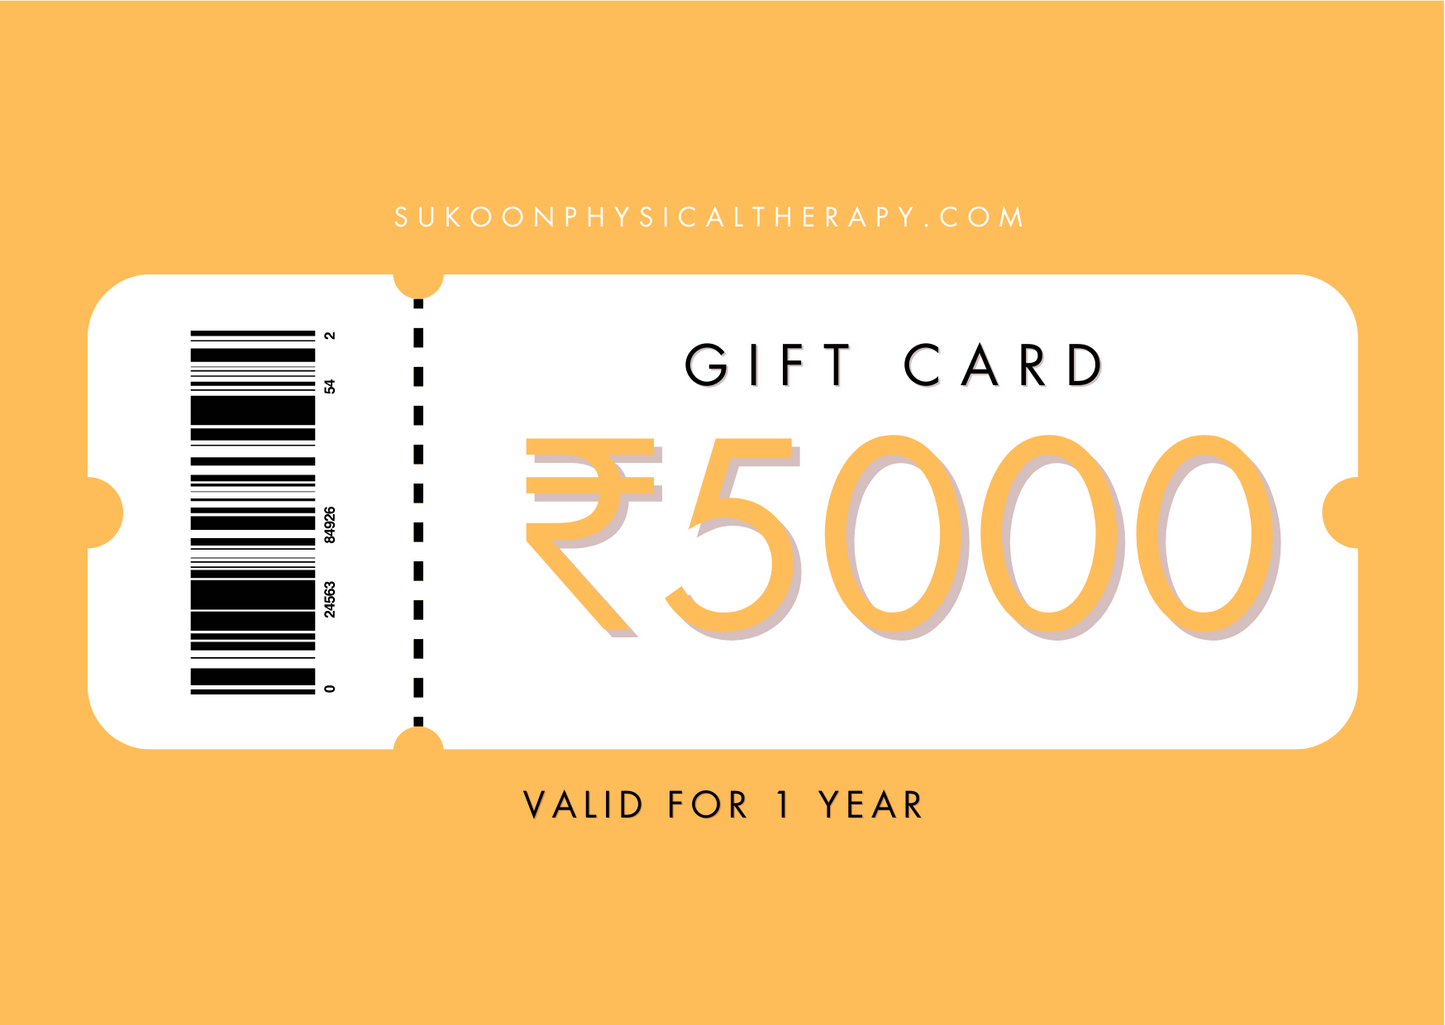 The Sukoon Physical Therapy Giftcard